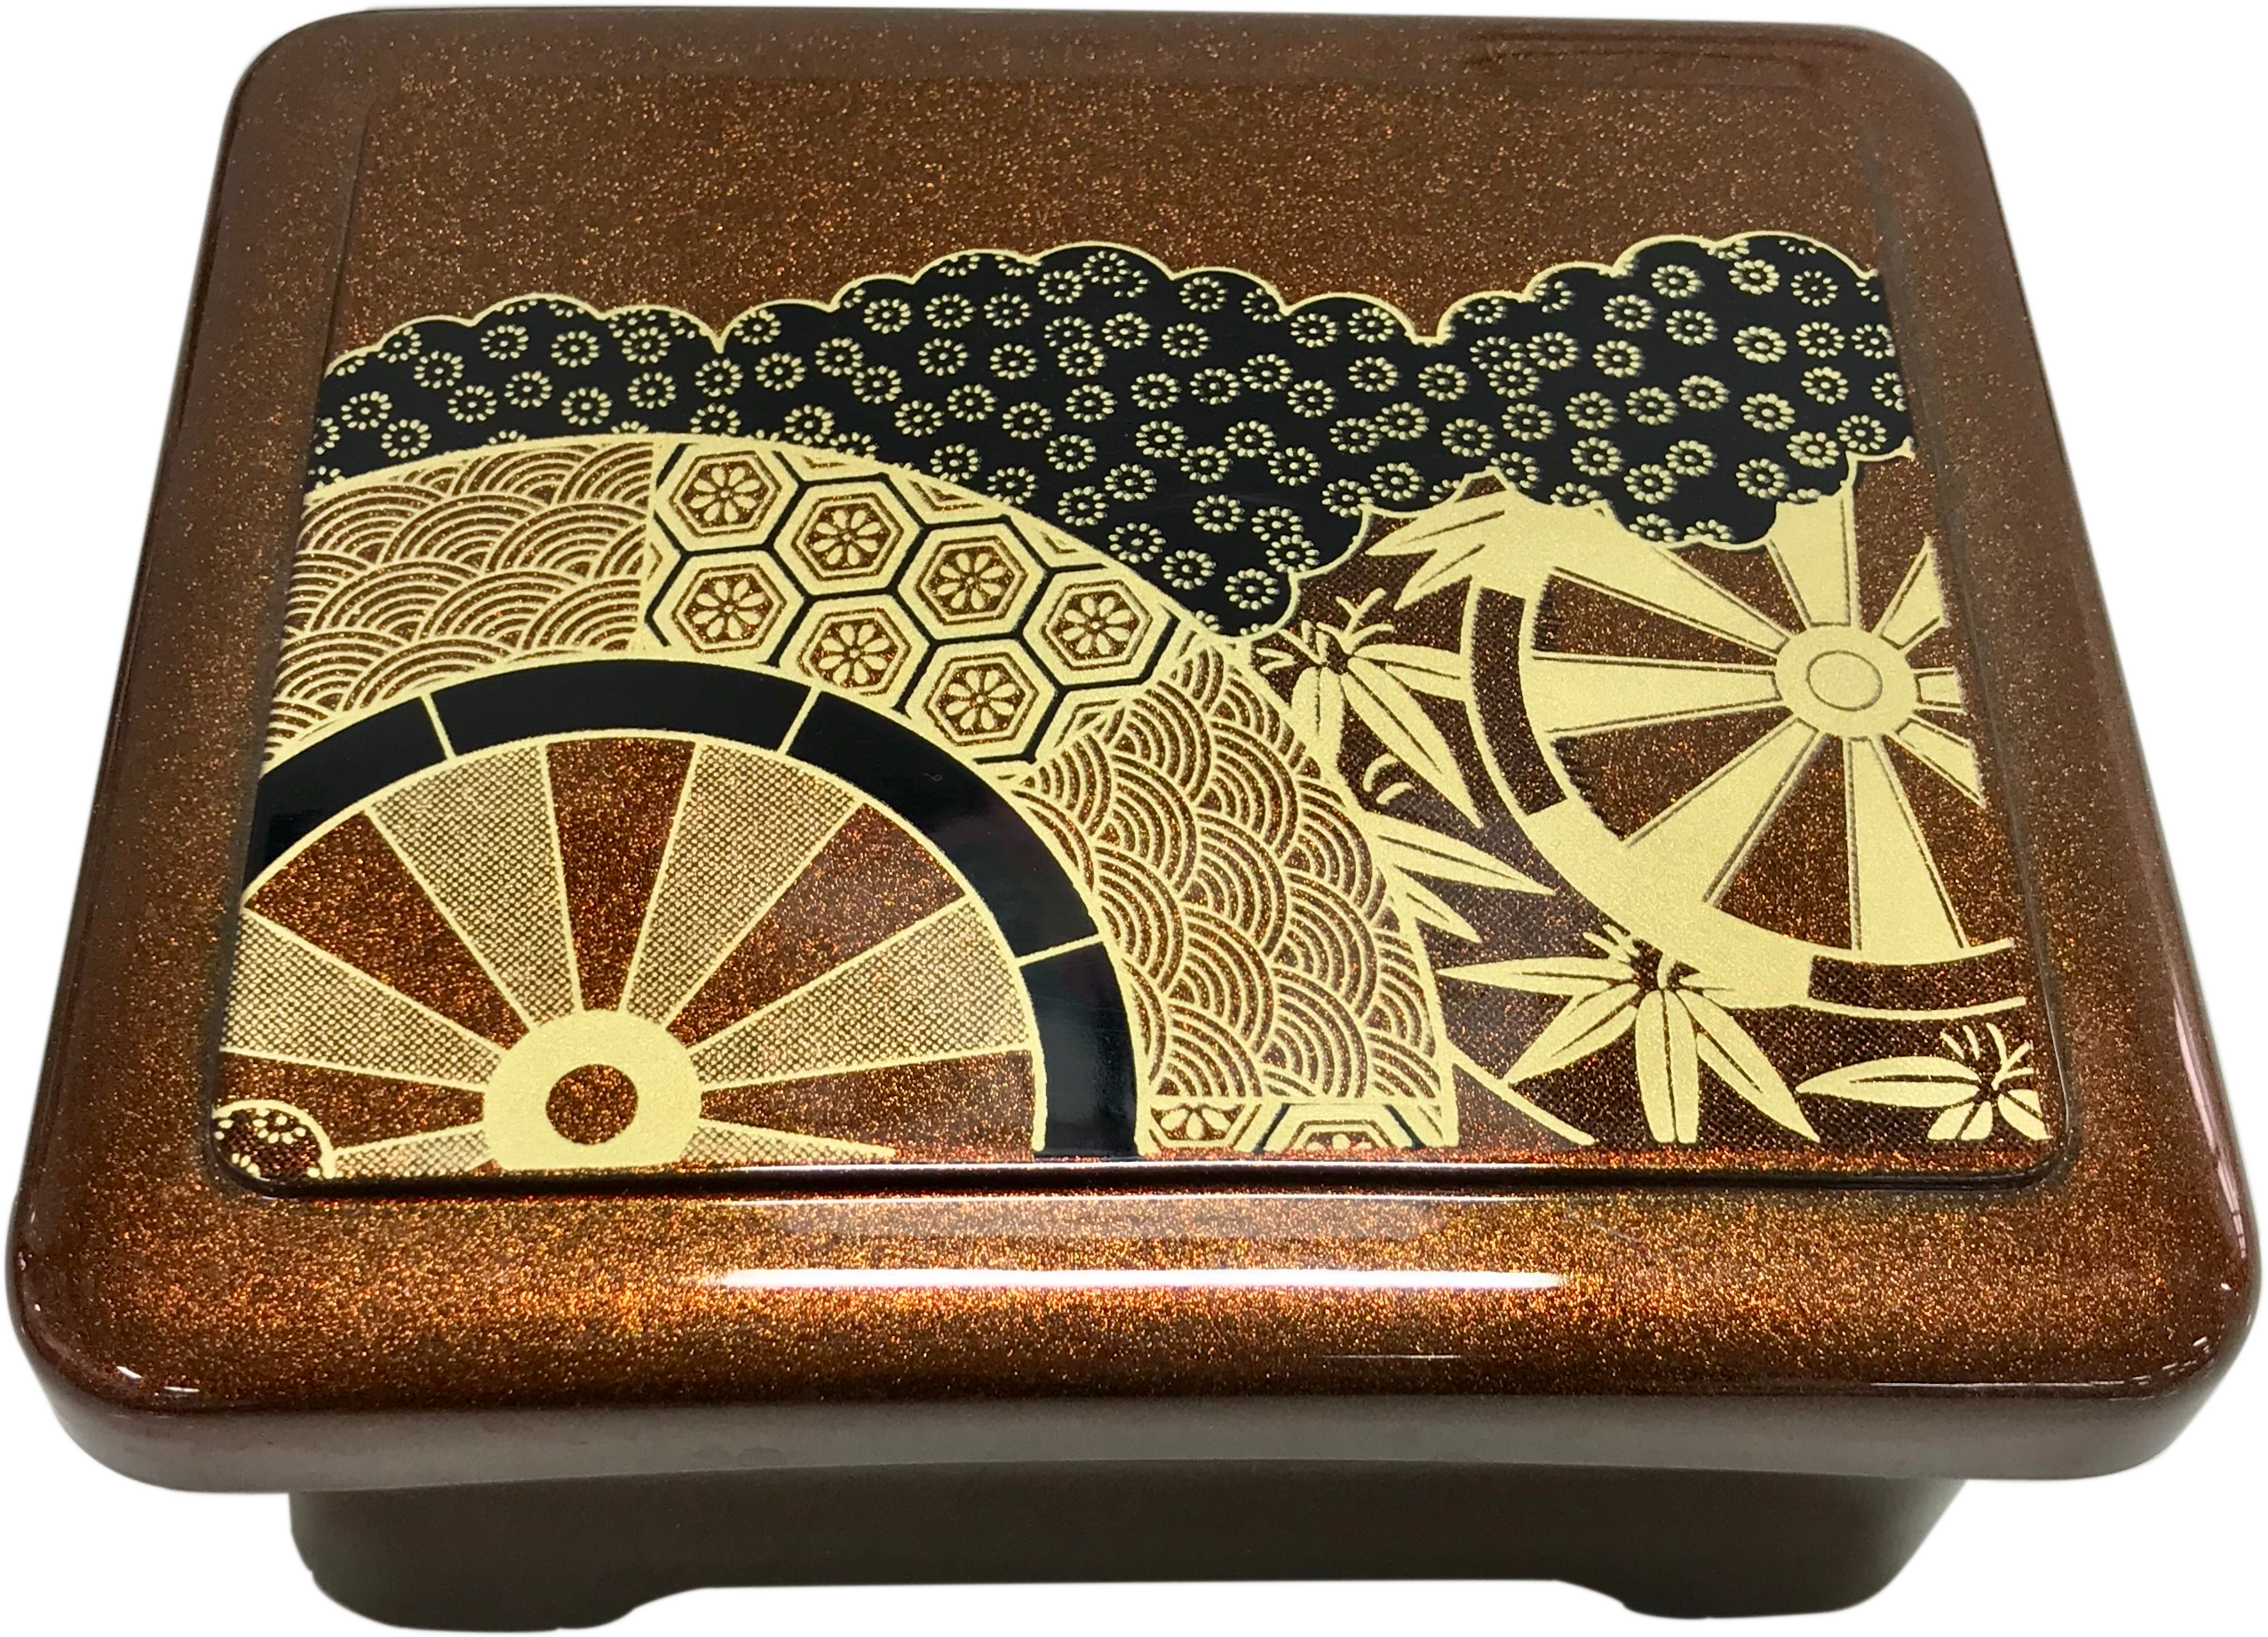 Japanese Gold Colored 5 Compartments Two Piece Bento Box Lacquered Plastic  Serving or Display Platter Tray 11.75 by 9.5